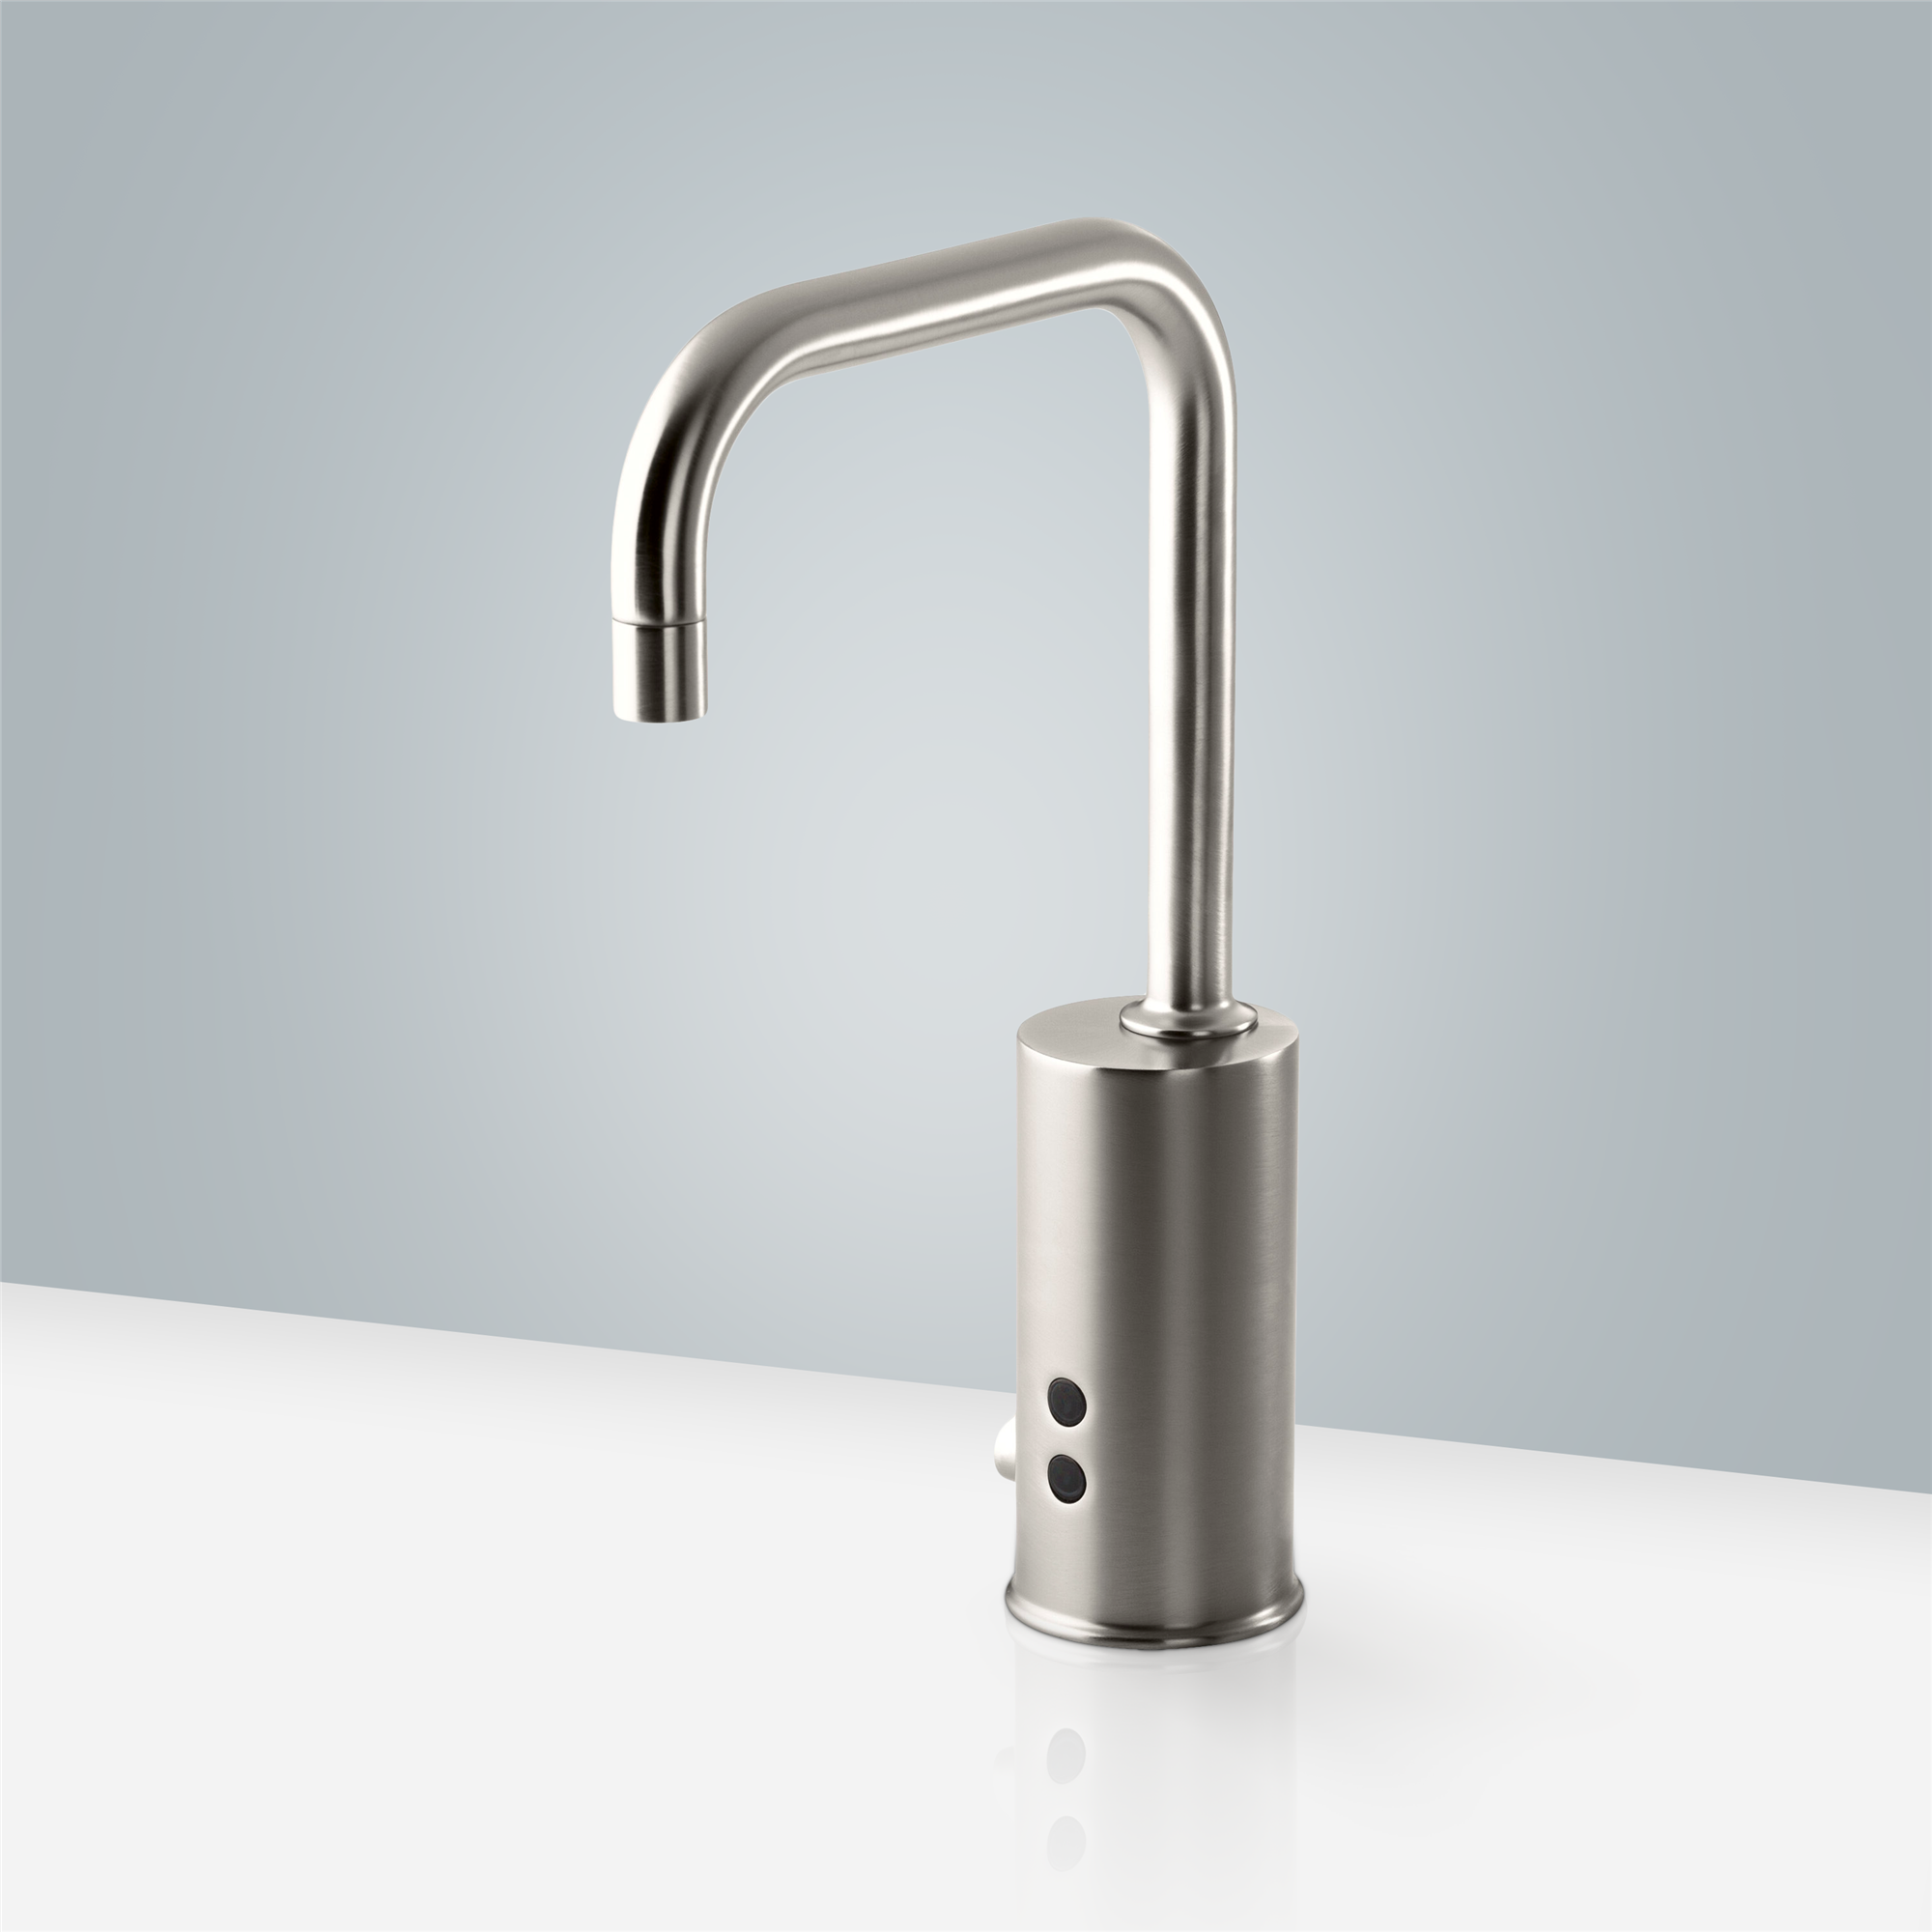 Fontana Leo Commercial Brushed Nickel Electronic Automatic Sensor Faucet